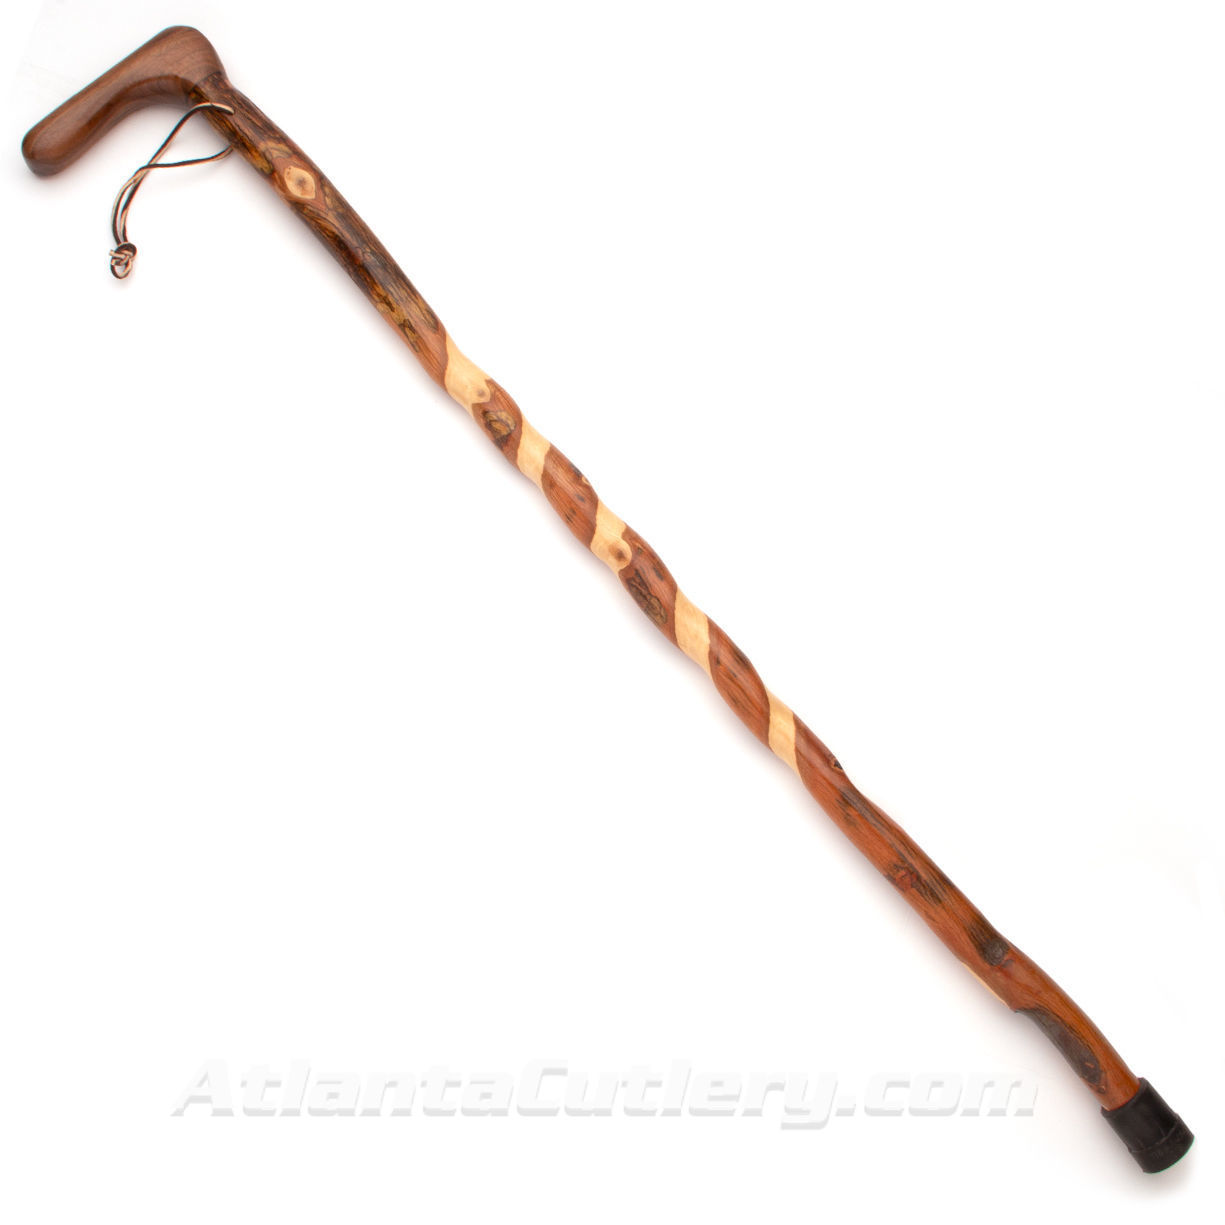 Whistle Creek Spiraled Hickory Cane made in USA is weatherproofed and has a leather wrist strap and a rubber tip